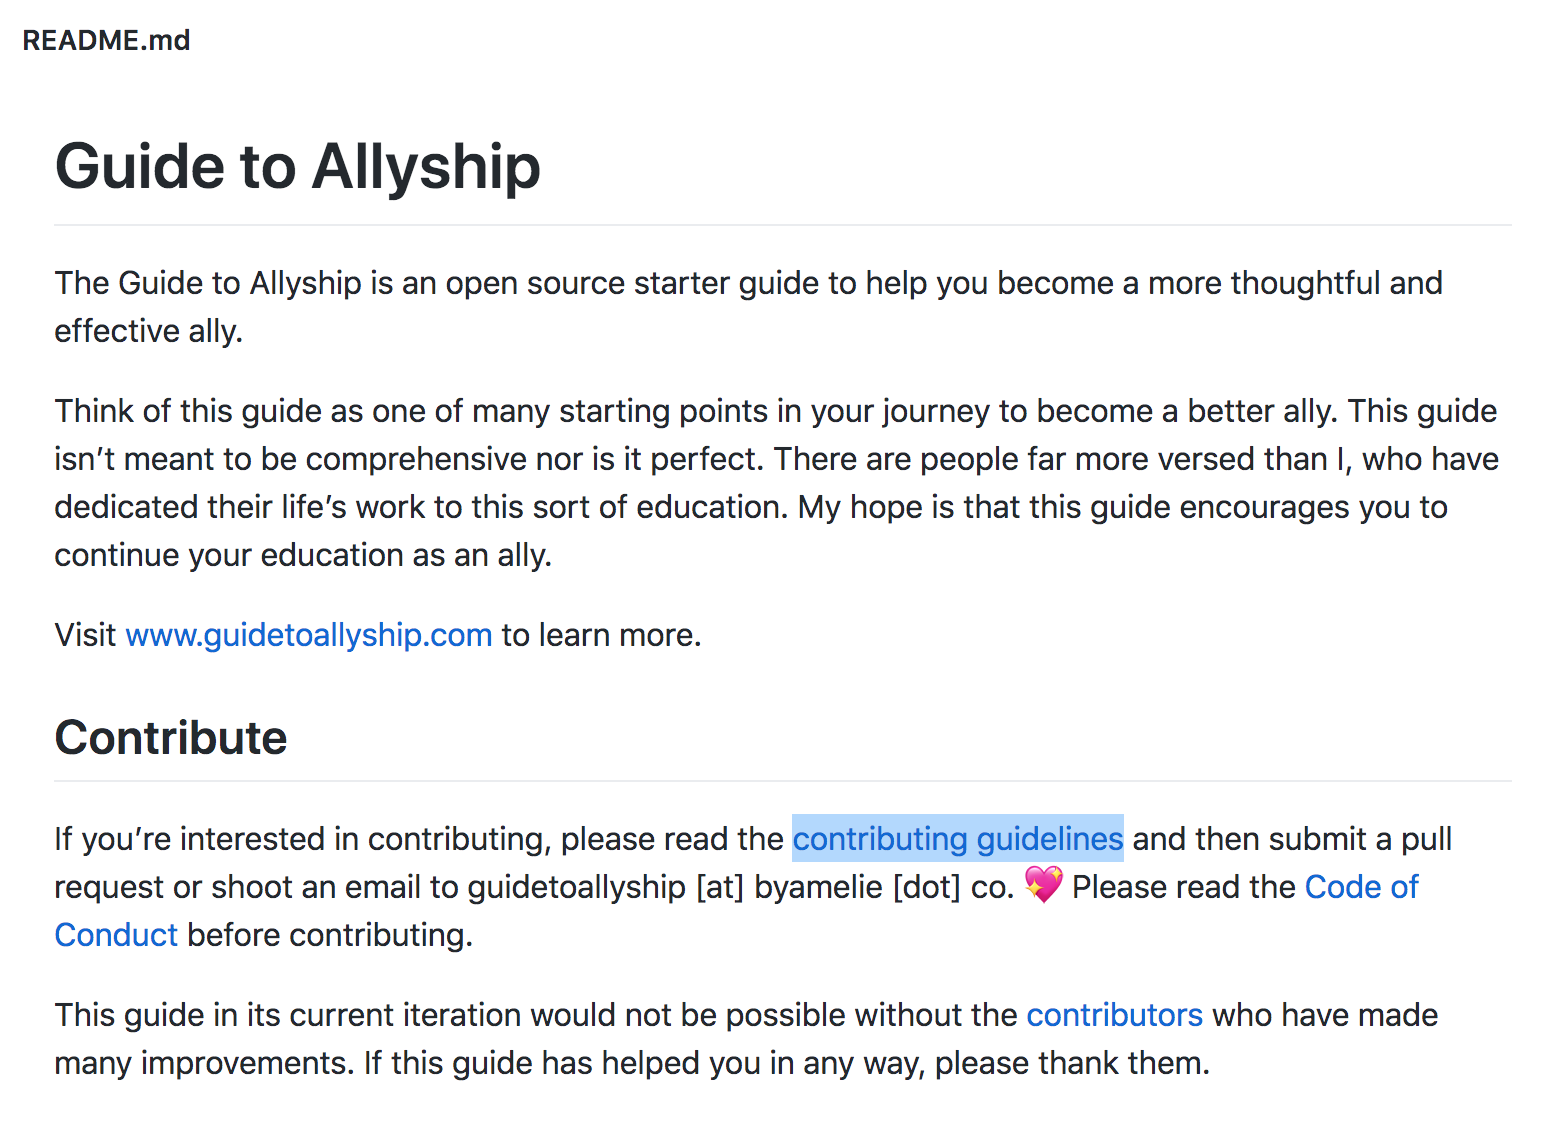 An example of a README.md file from a Guide to Allyship project on GitHub